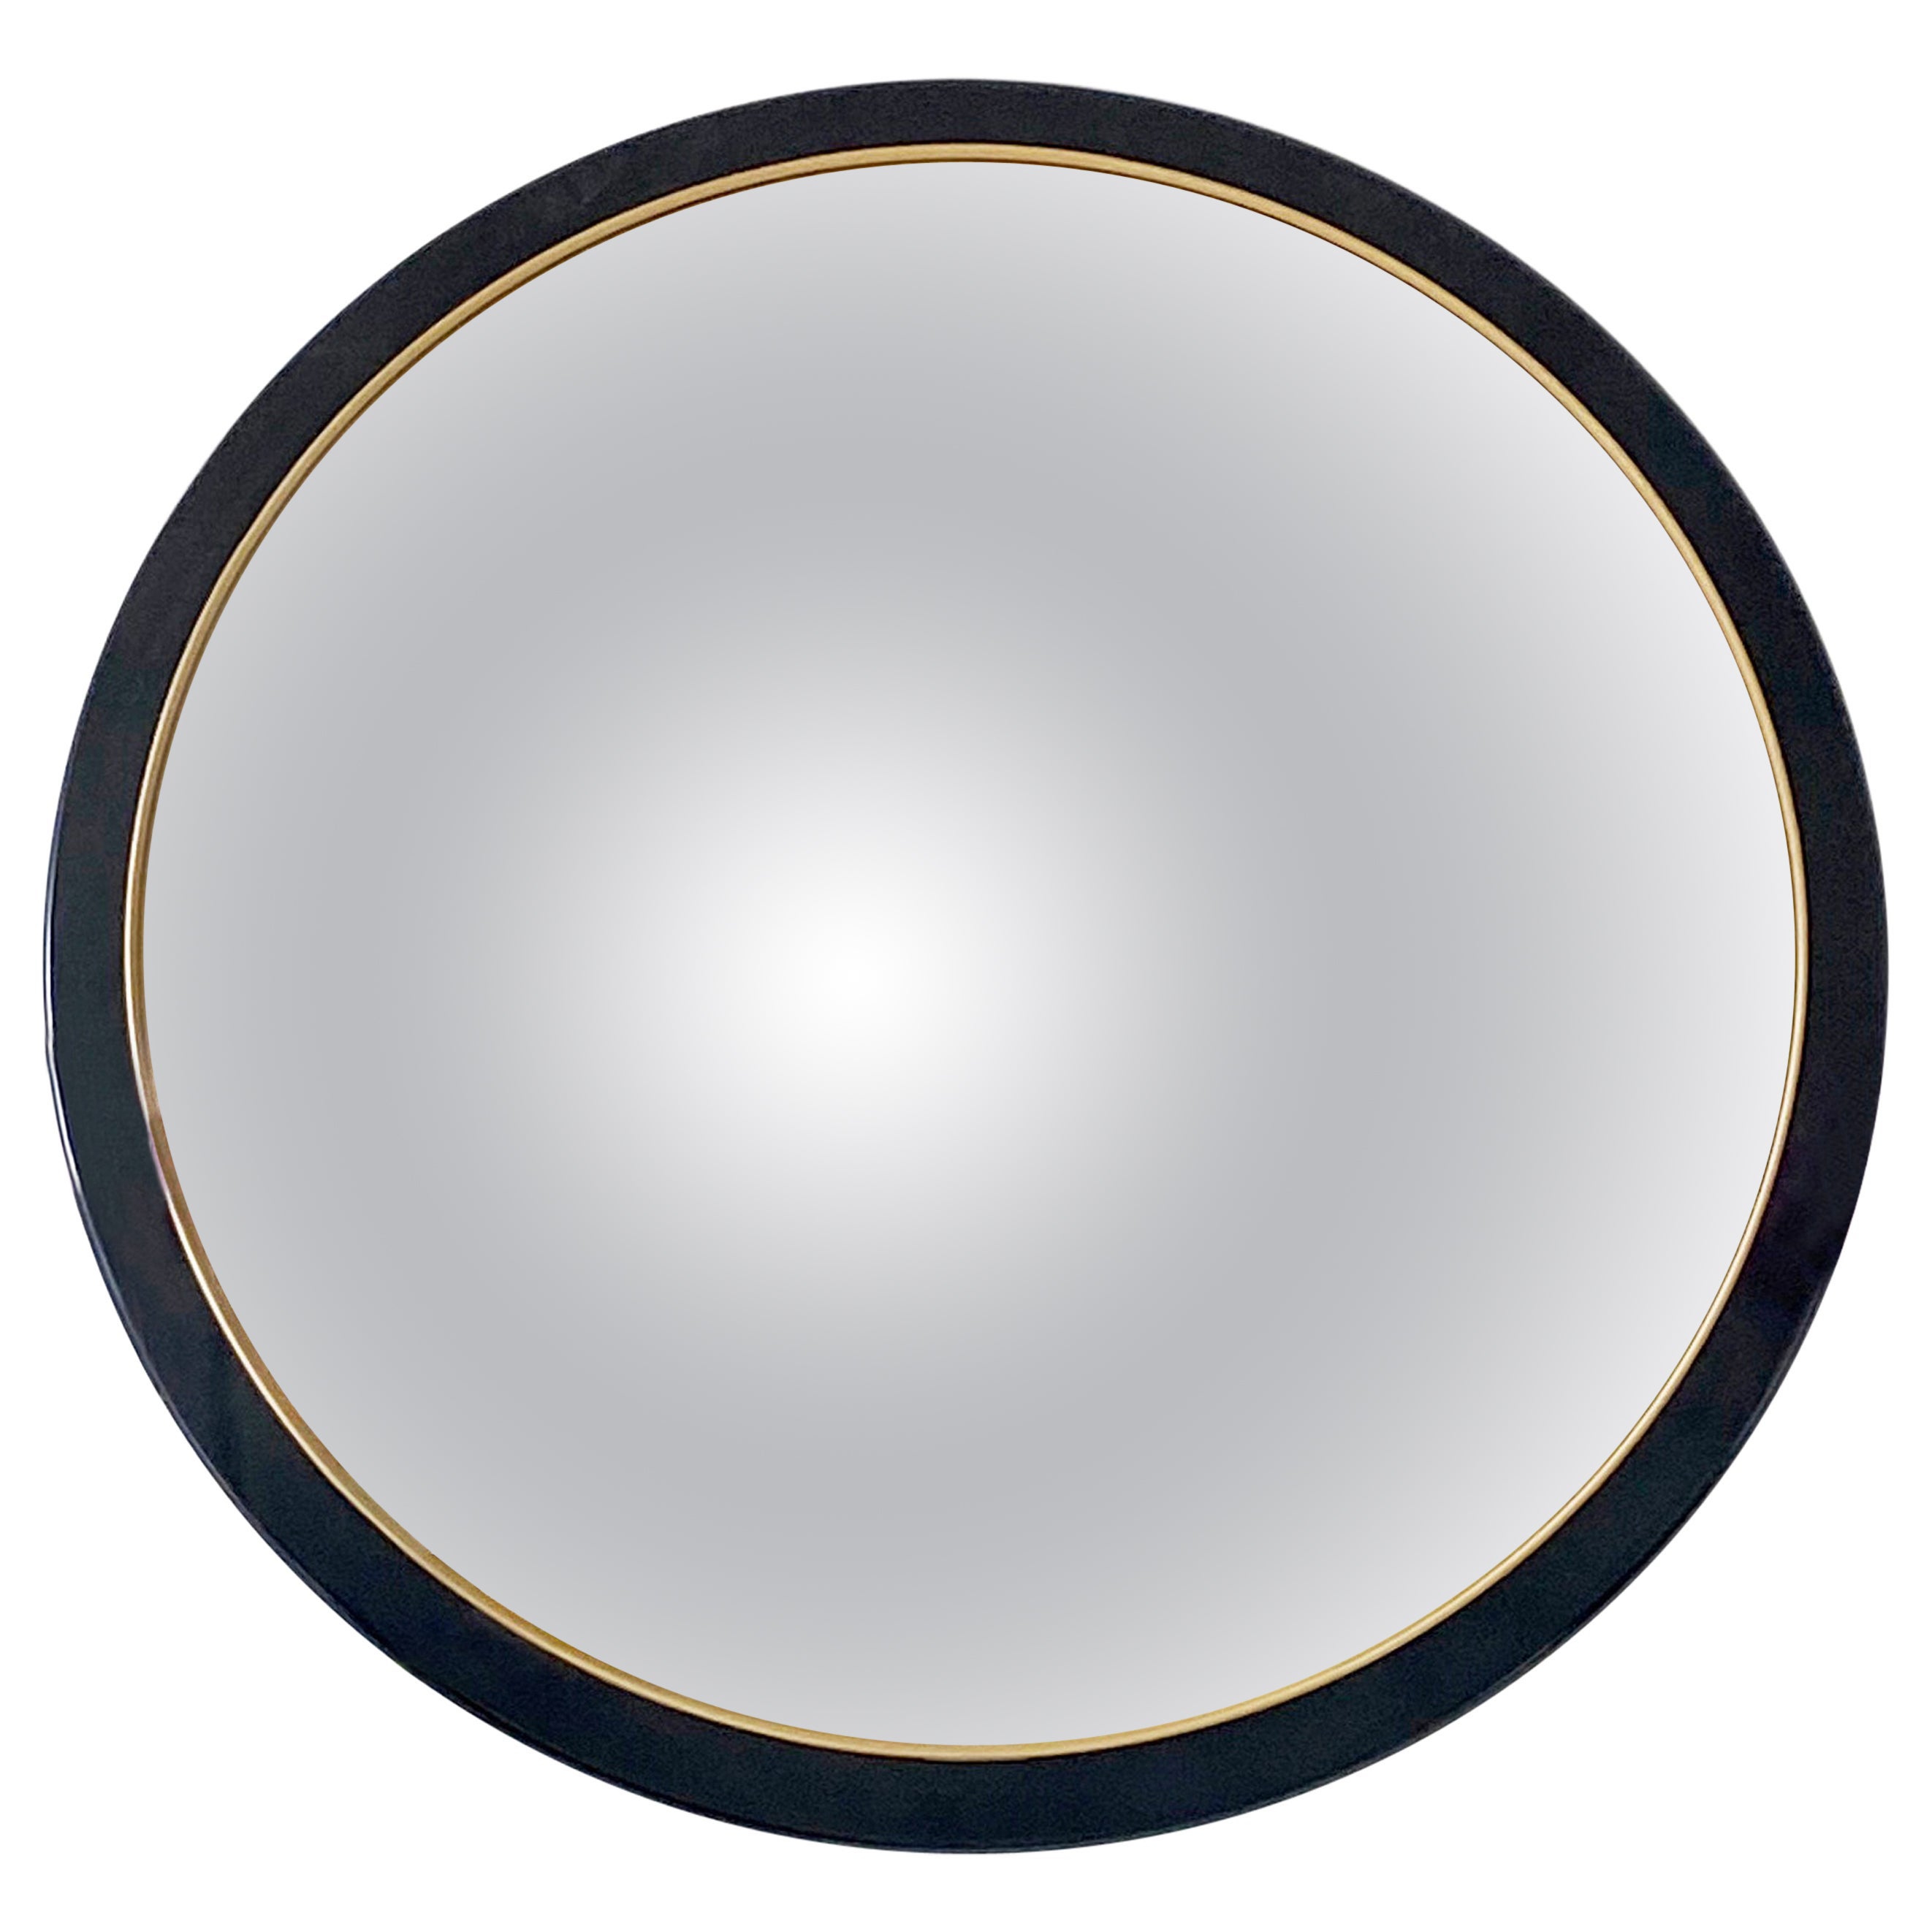 The Stilo Nero is a highly decorative convex wall mirror that creates a focal point and adds elegance to any room. The mirror itself is silvered using traditional methods and fabricated from 6mm low iron glass with a curvature of 7 cms. The overall